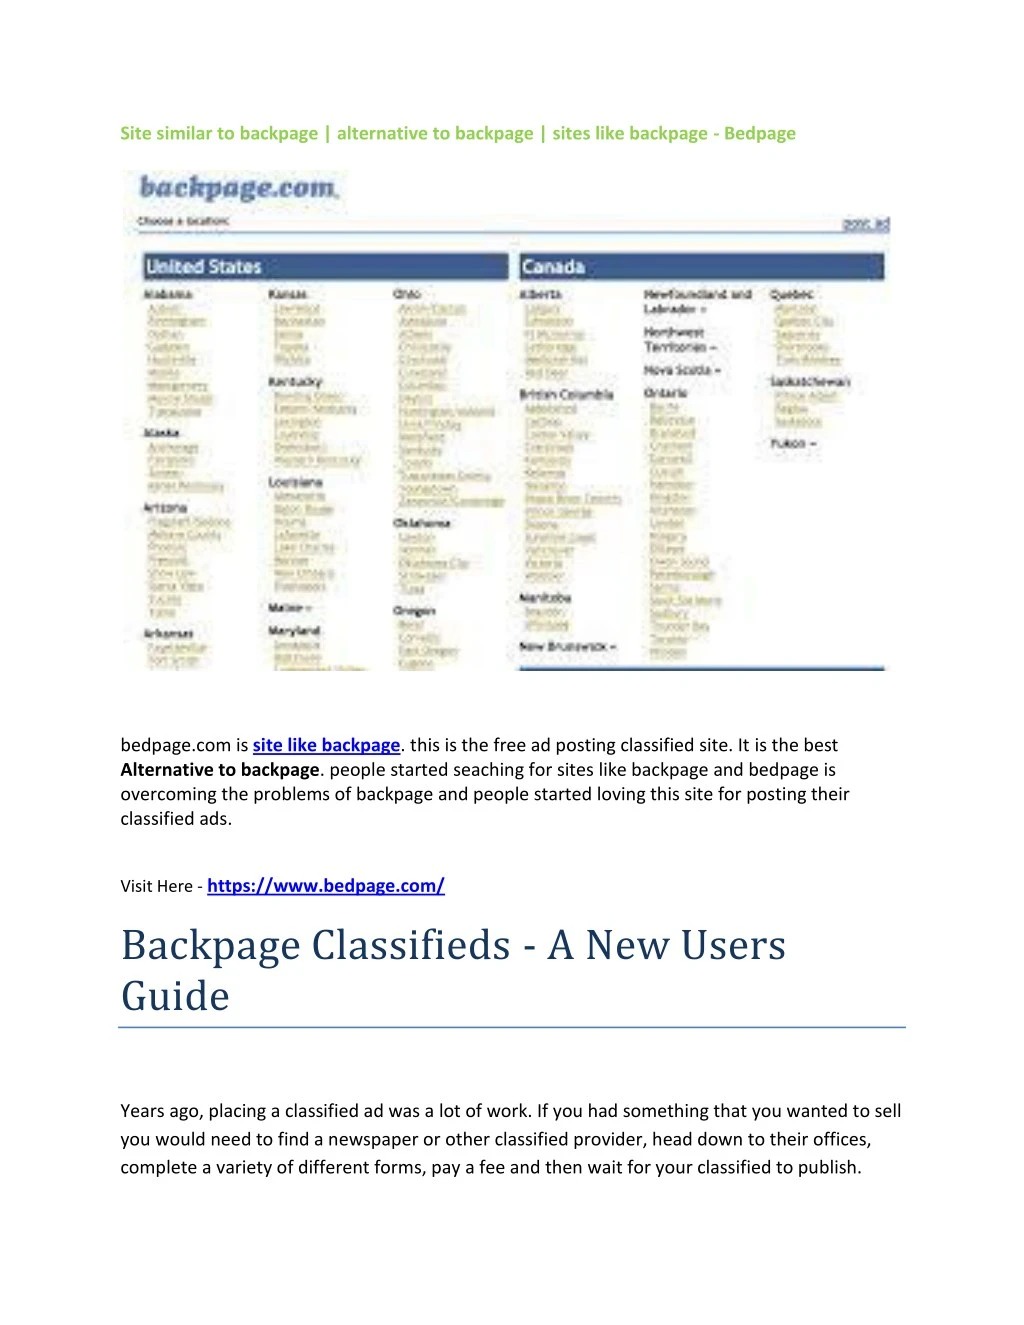 site similar to backpage alternative to backpage